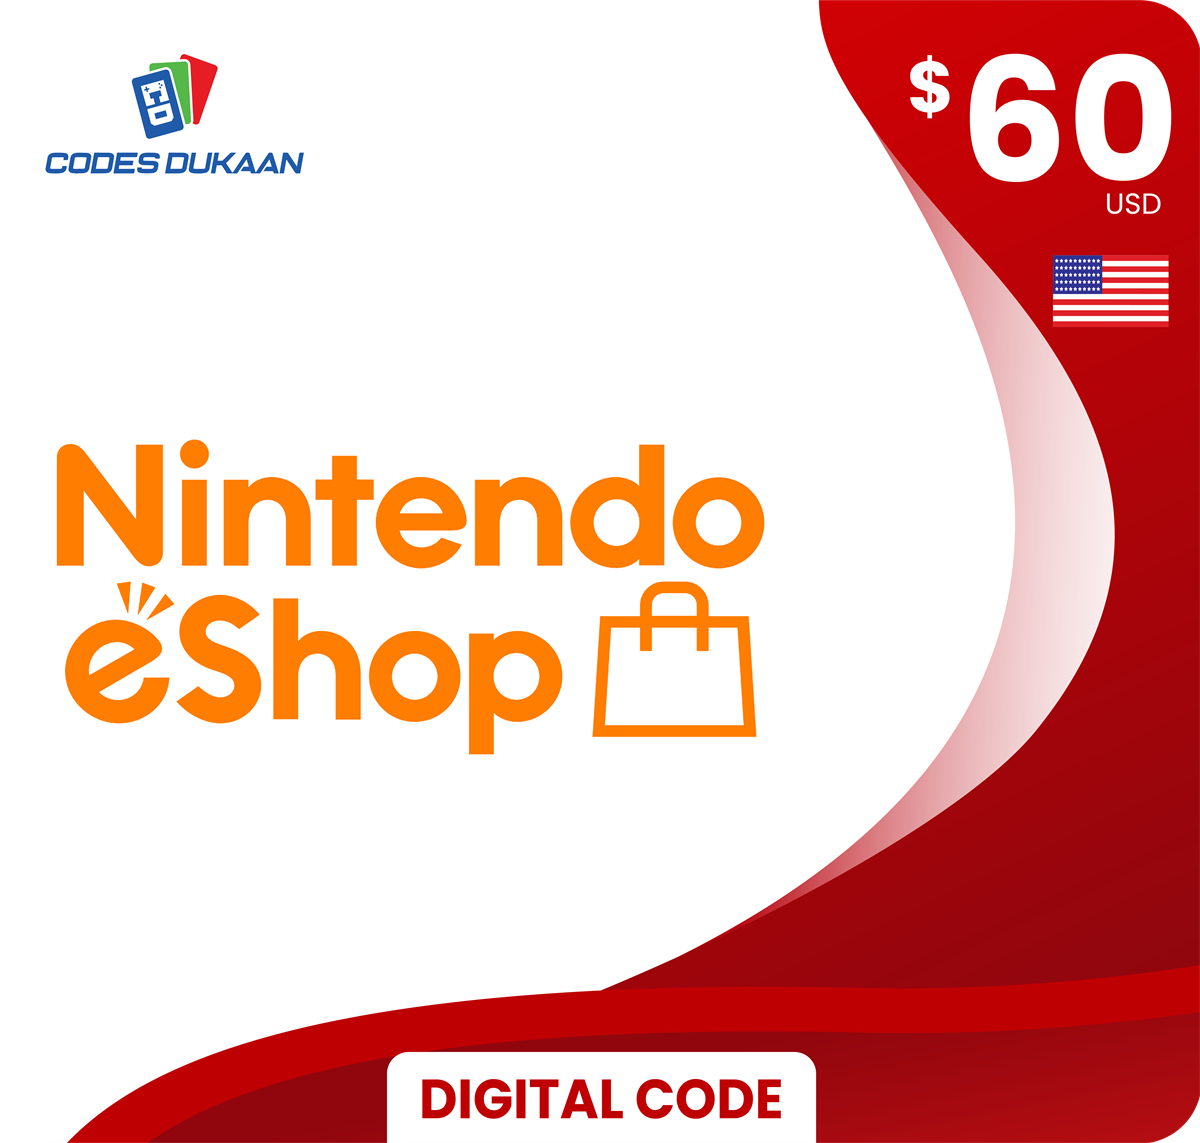 60$ eShop USA in Pakistan for Rs. 17600.00, Codes Dukaan